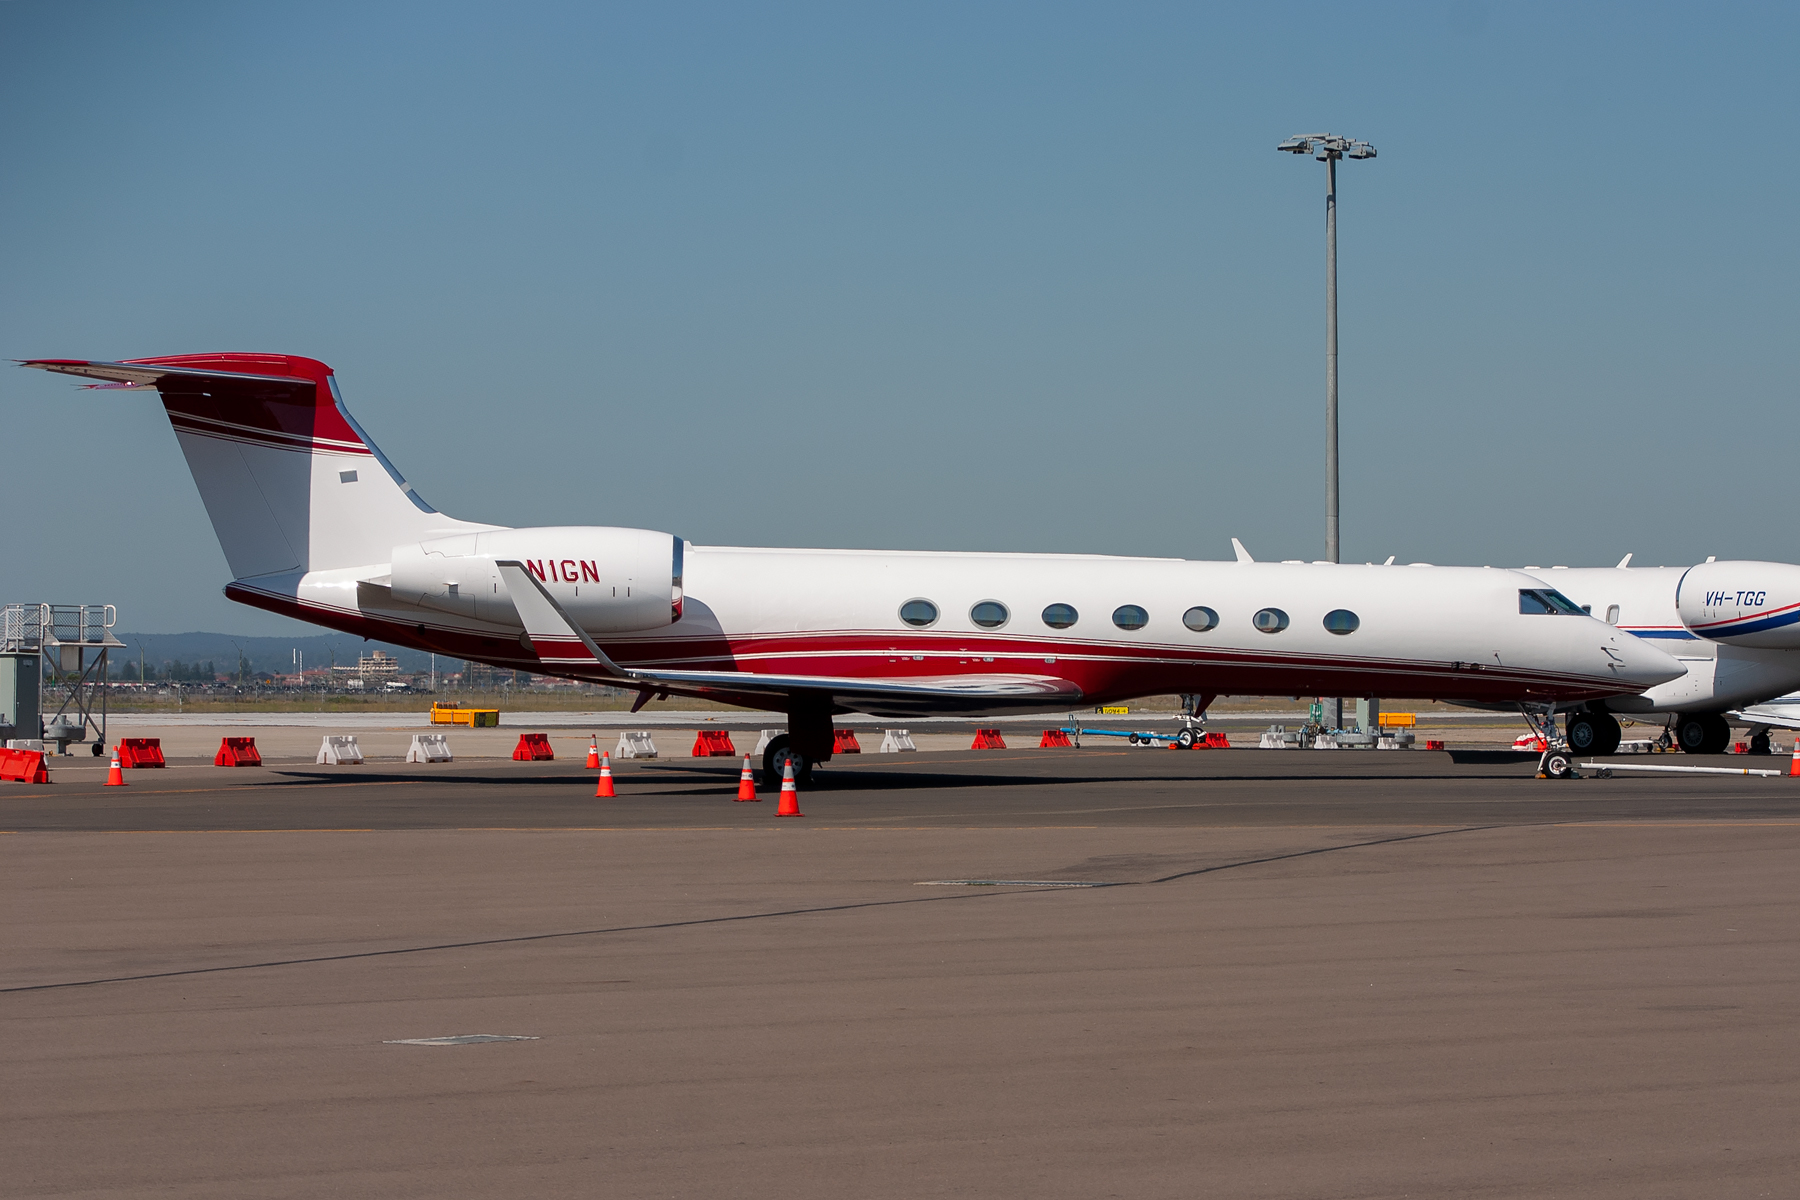 Norman Aircraft Leasing Gulfstream G550 N1GN at Kingsford Smith